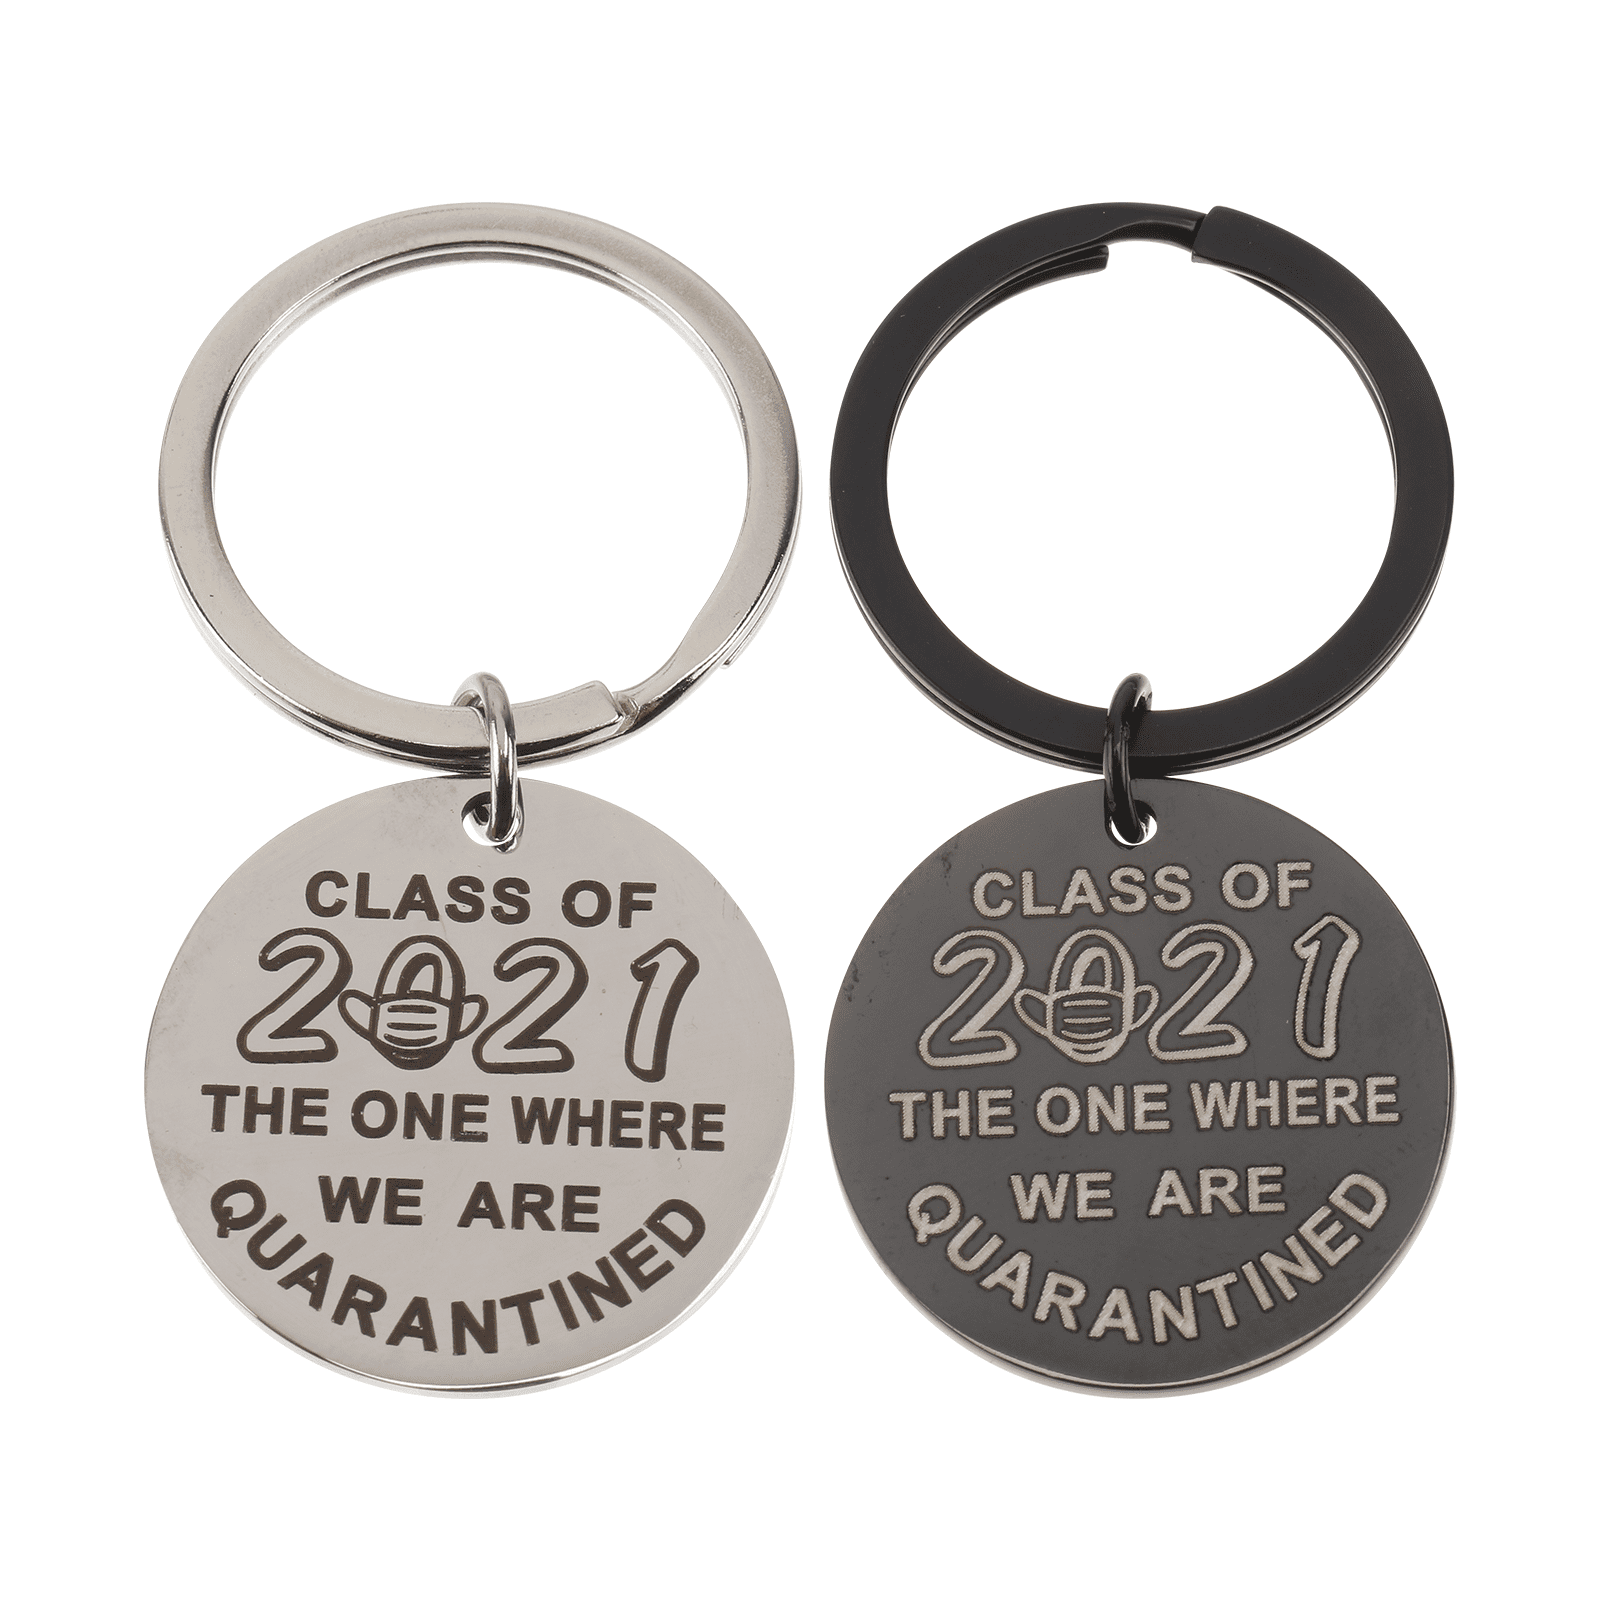 Details about   To My Daughter A Letters Keychain DIY Car Keyring Stainless Steel Jewelry Gifts 